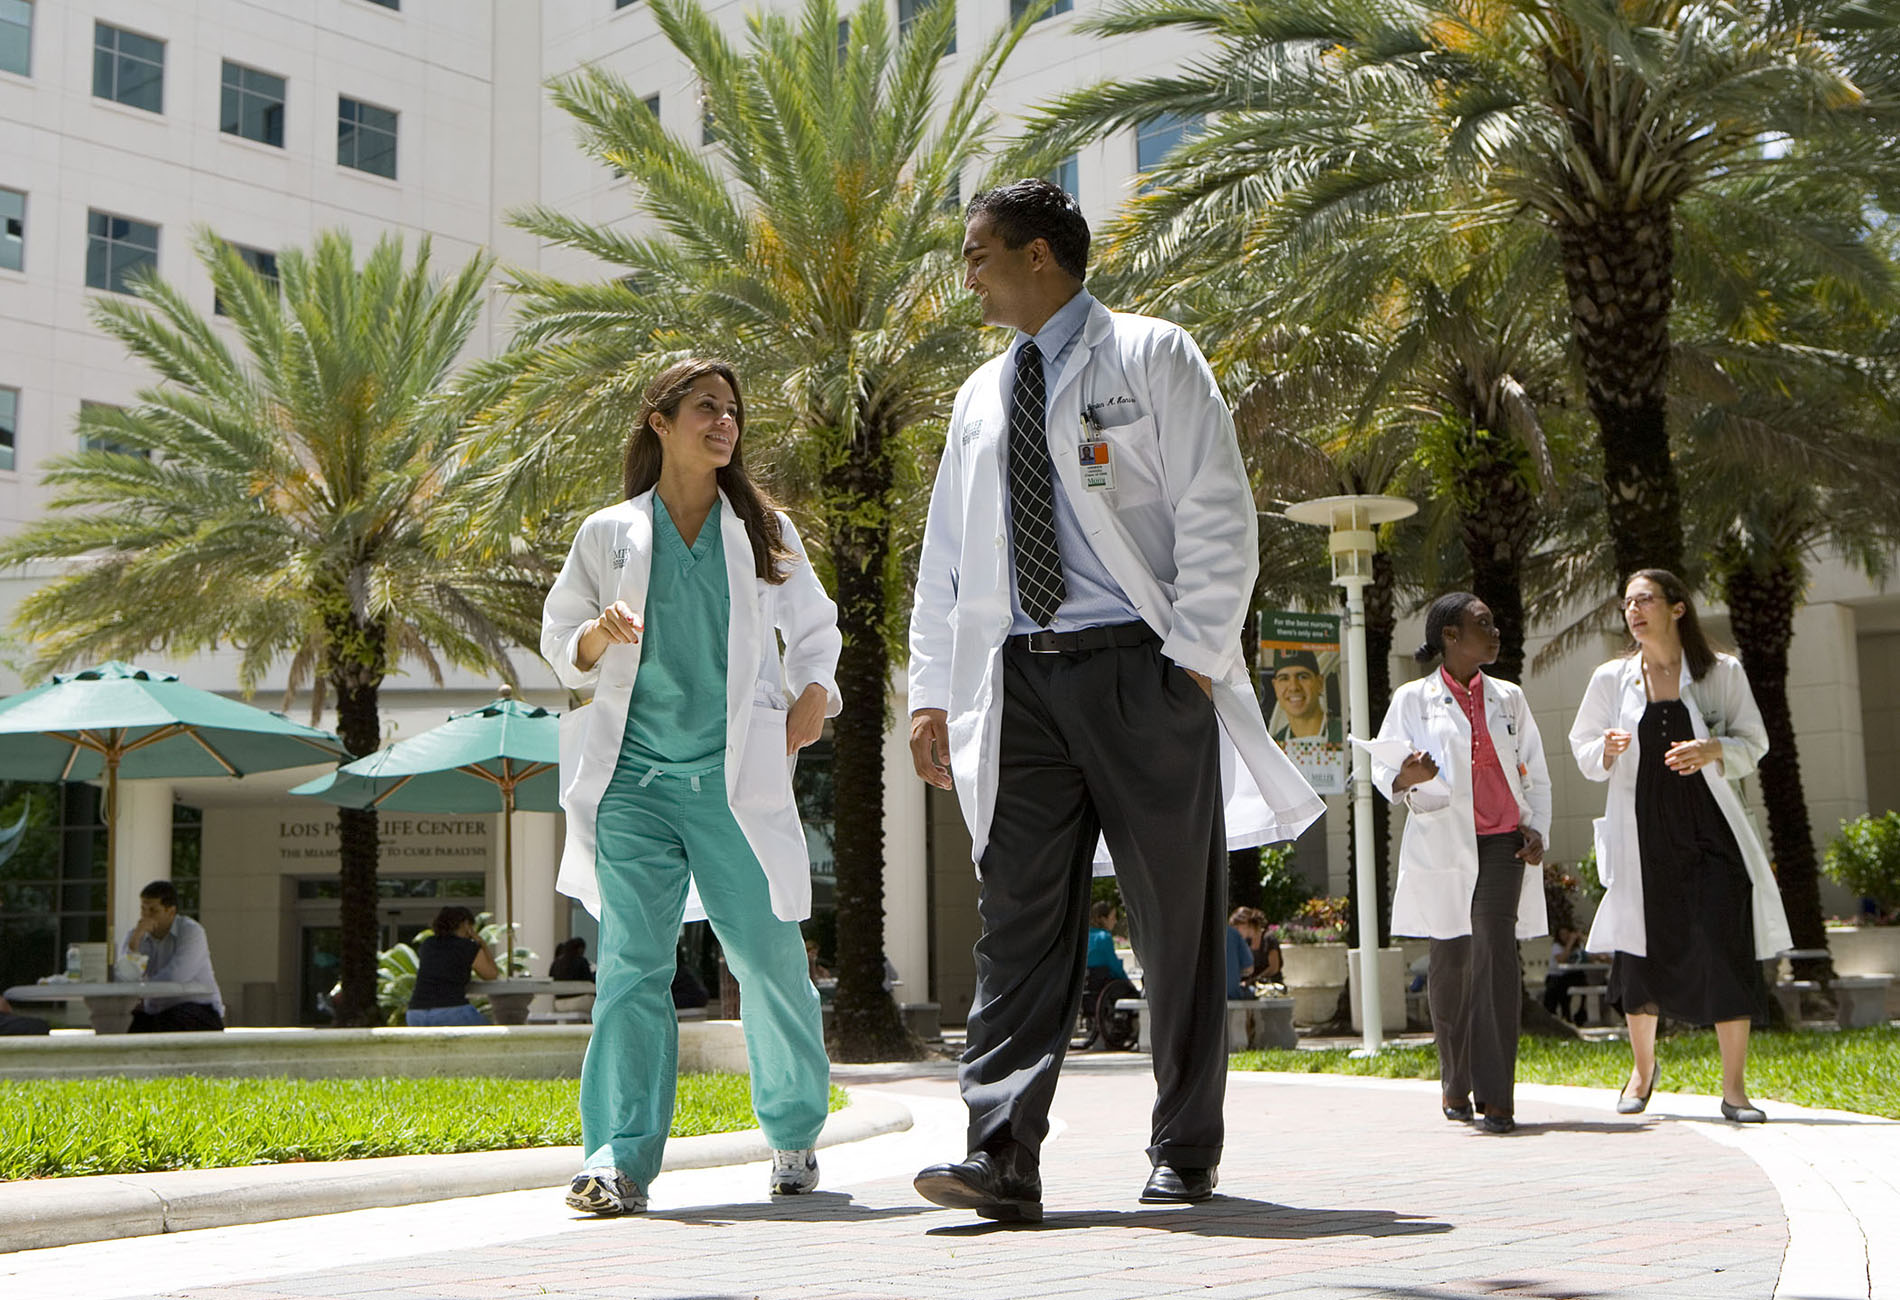 Student and a medical professional walking on the University of Miami campus.